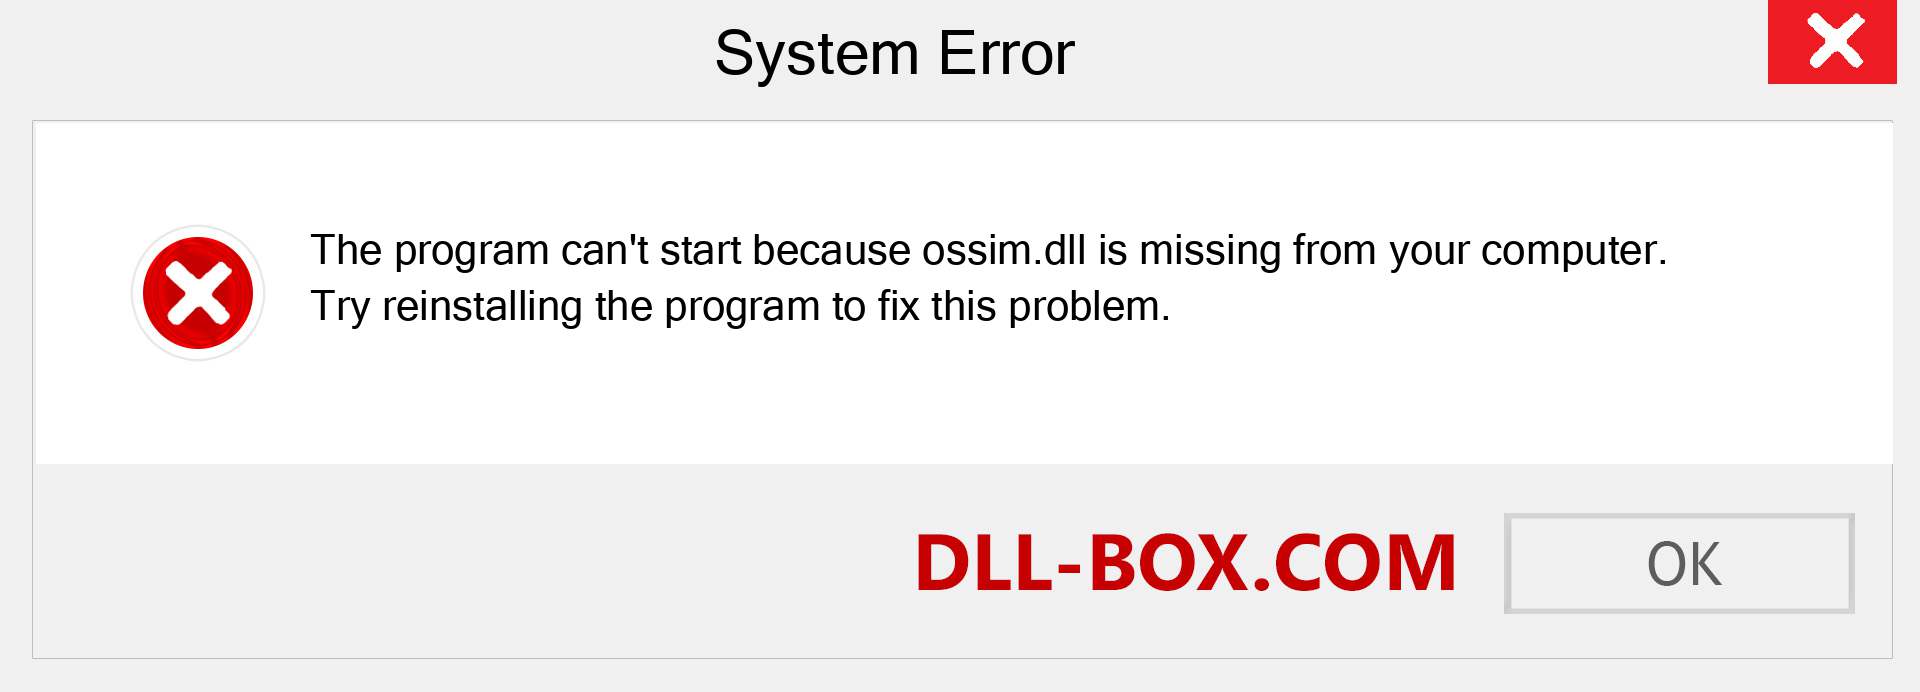  ossim.dll file is missing?. Download for Windows 7, 8, 10 - Fix  ossim dll Missing Error on Windows, photos, images